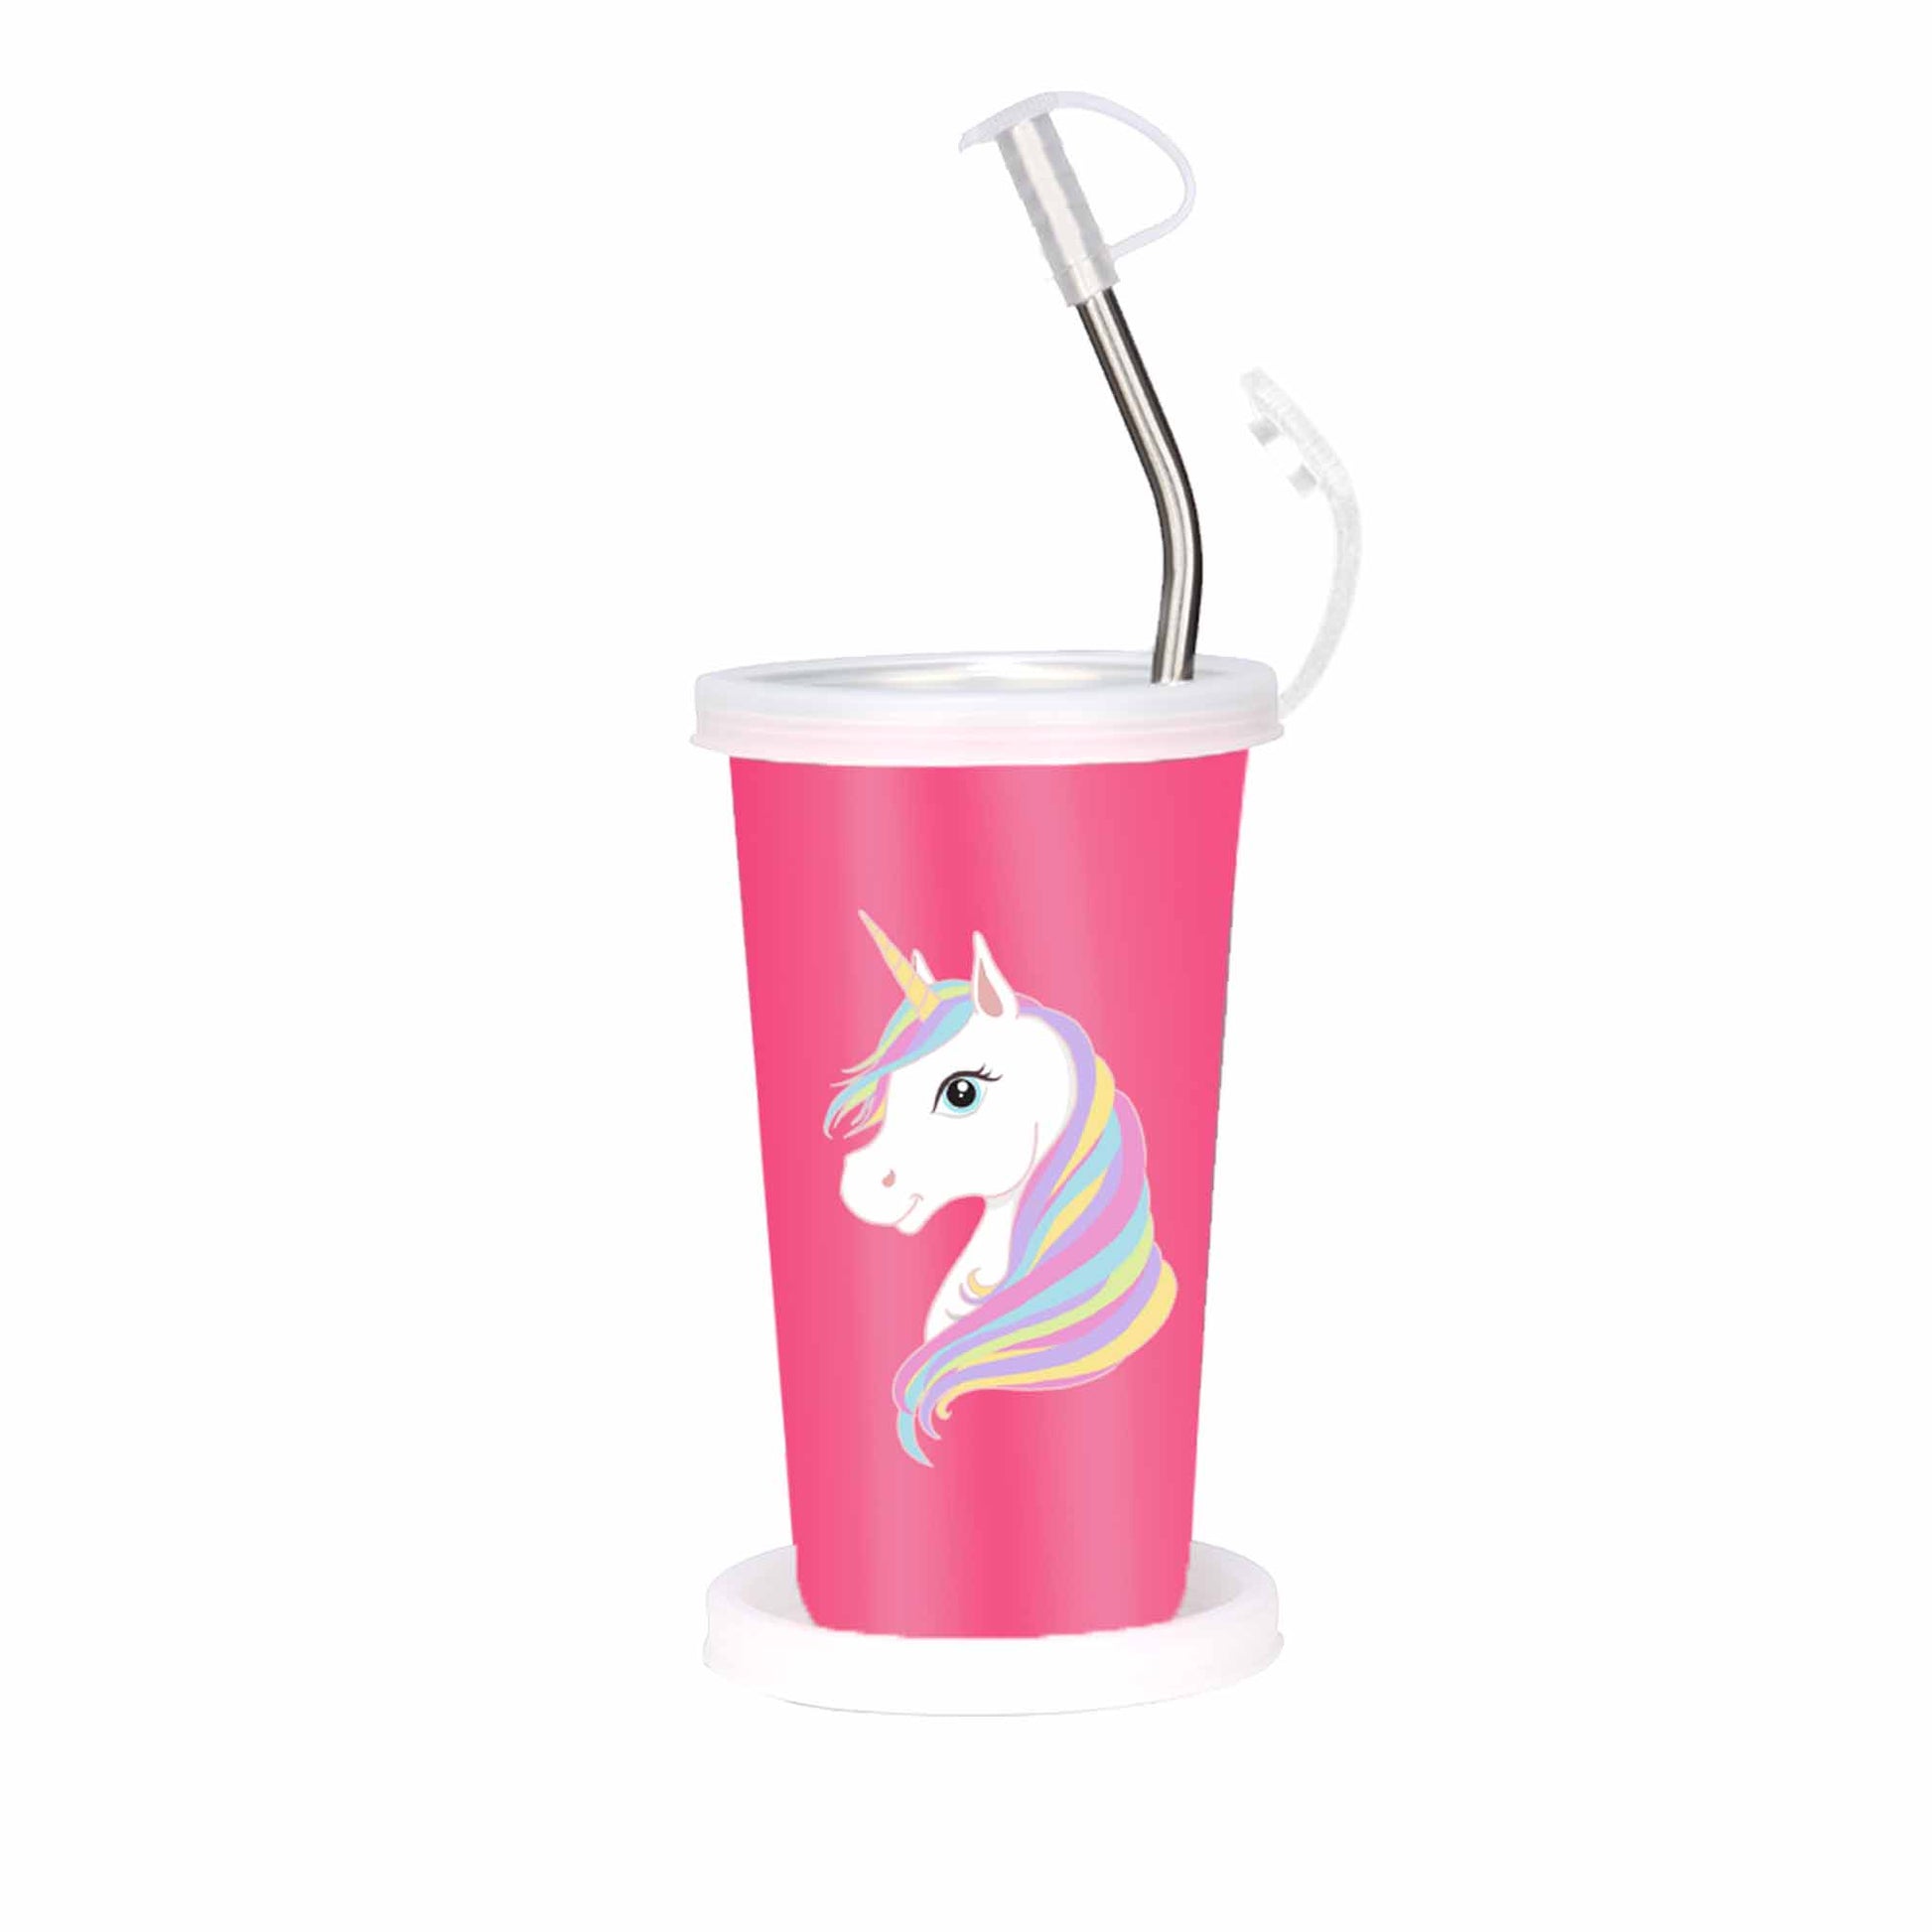 PddFalcon Stainless Steel Sipper Cartoon Strawglass With Accessories CN5 370ml